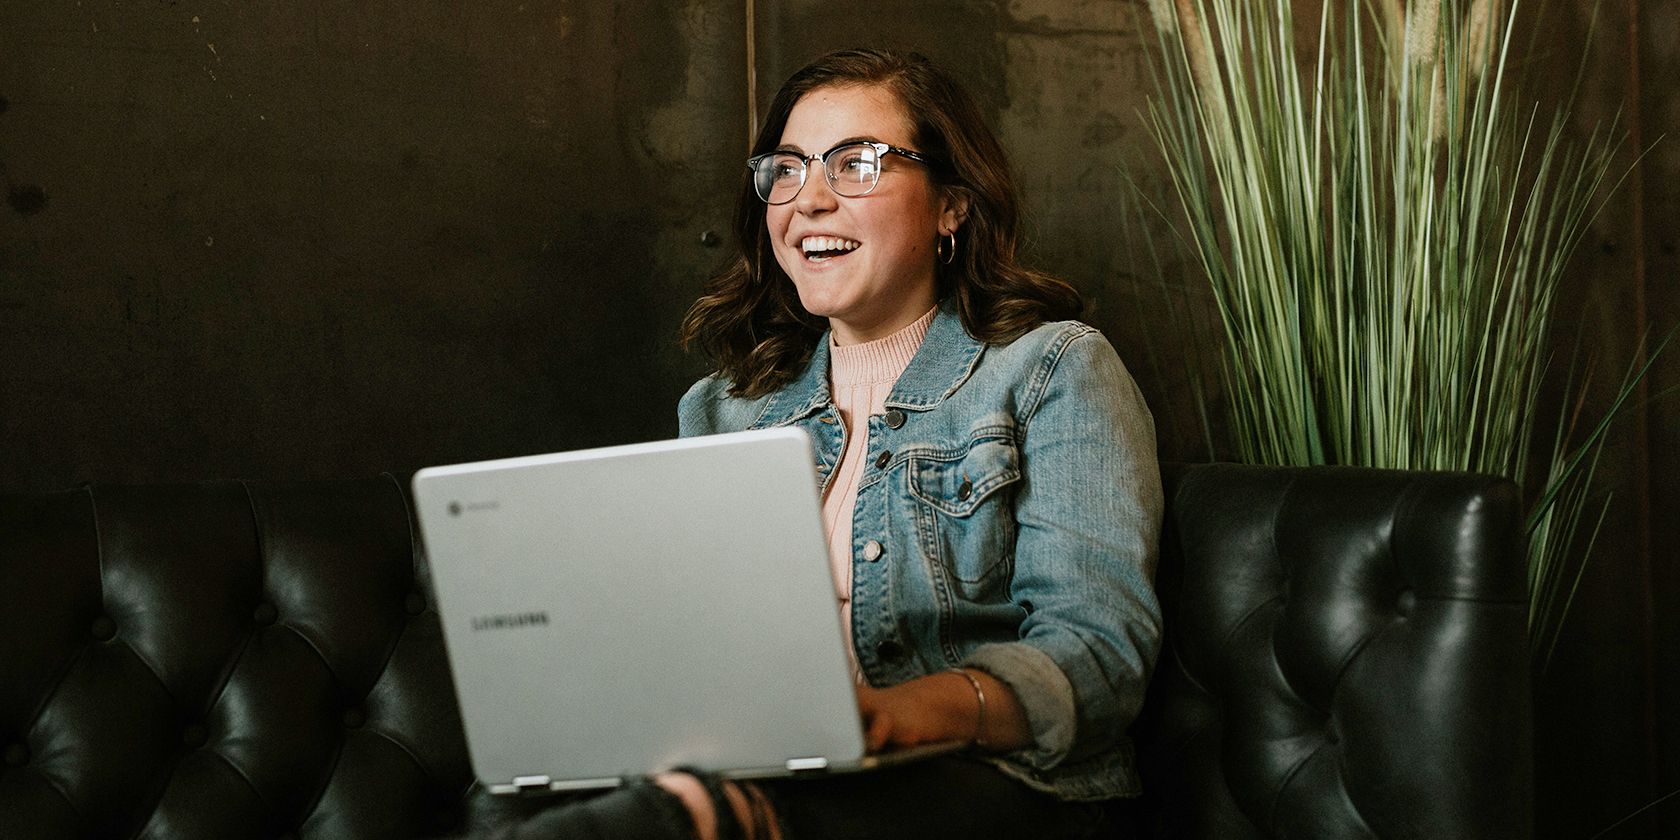 Woman using laptop and smiling